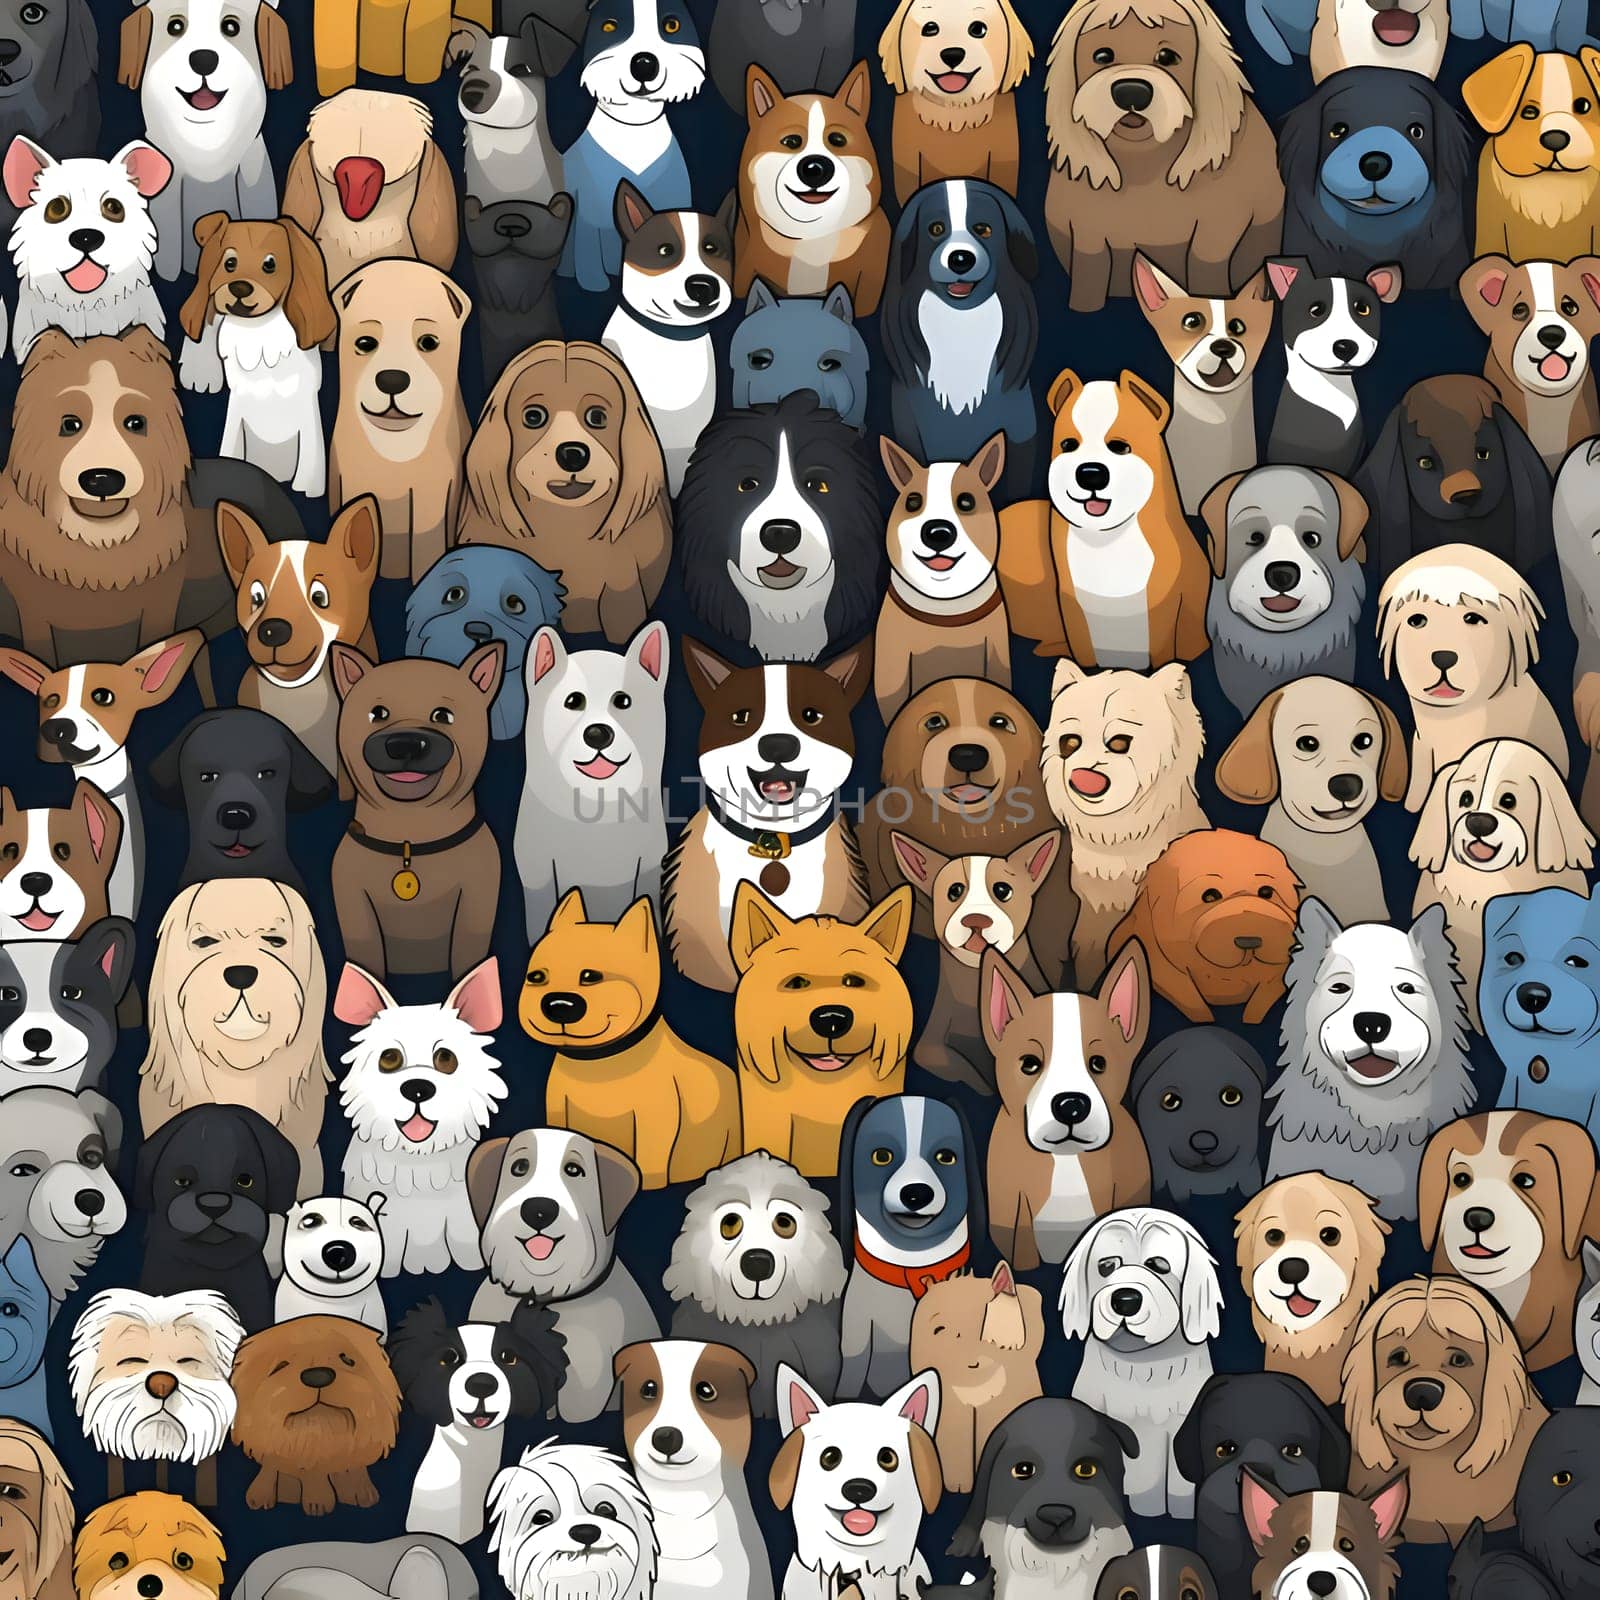 Patterns and banners backgrounds: Seamless pattern with different breeds of dogs. Vector illustration.